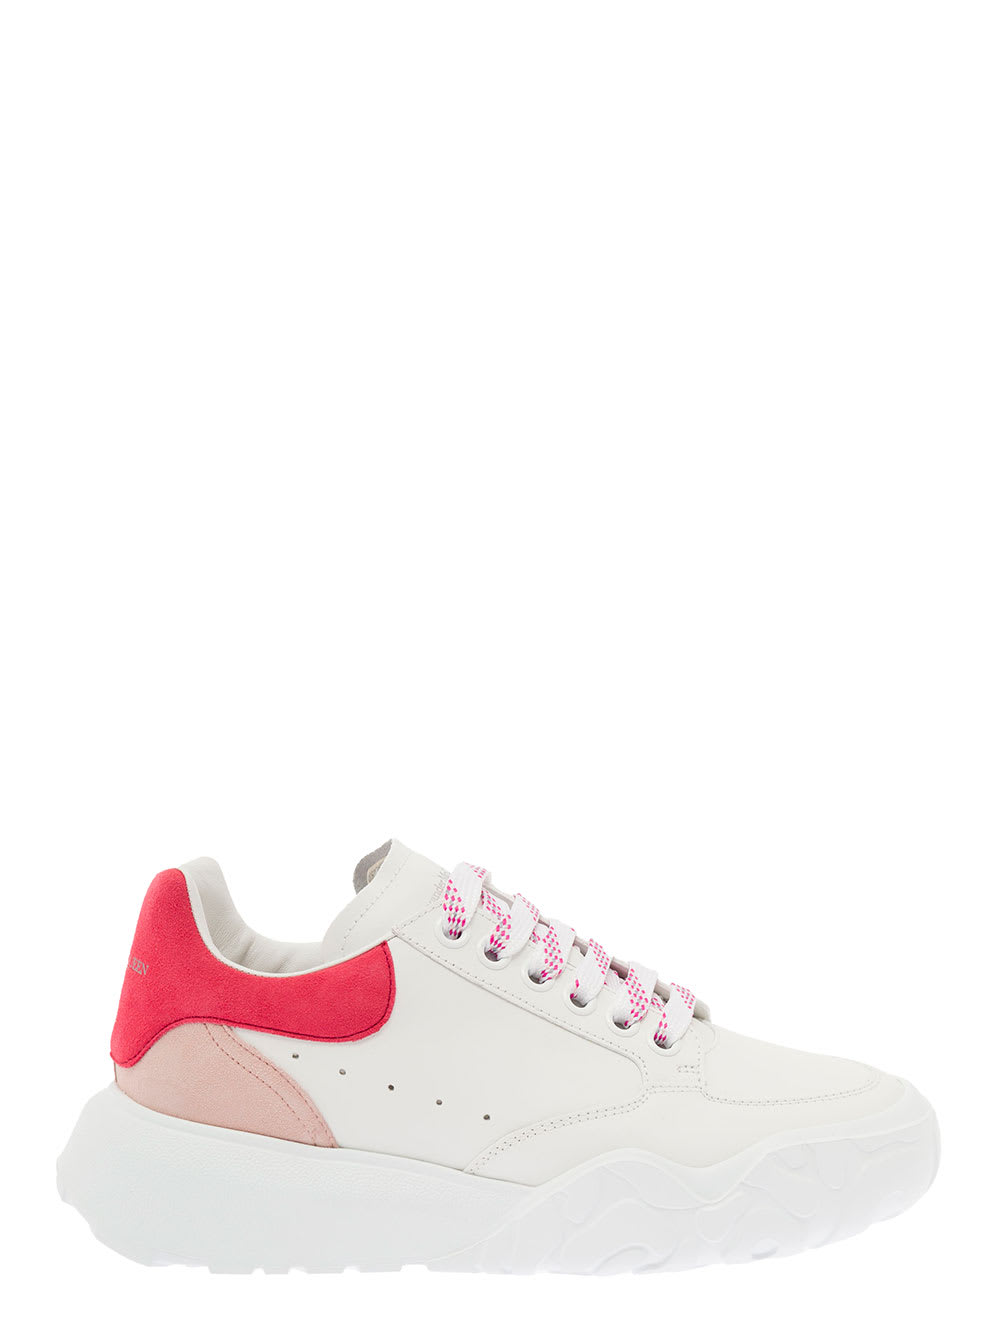 New Court Multicolor Leather Sneakers Alexander Mcqueen Woman